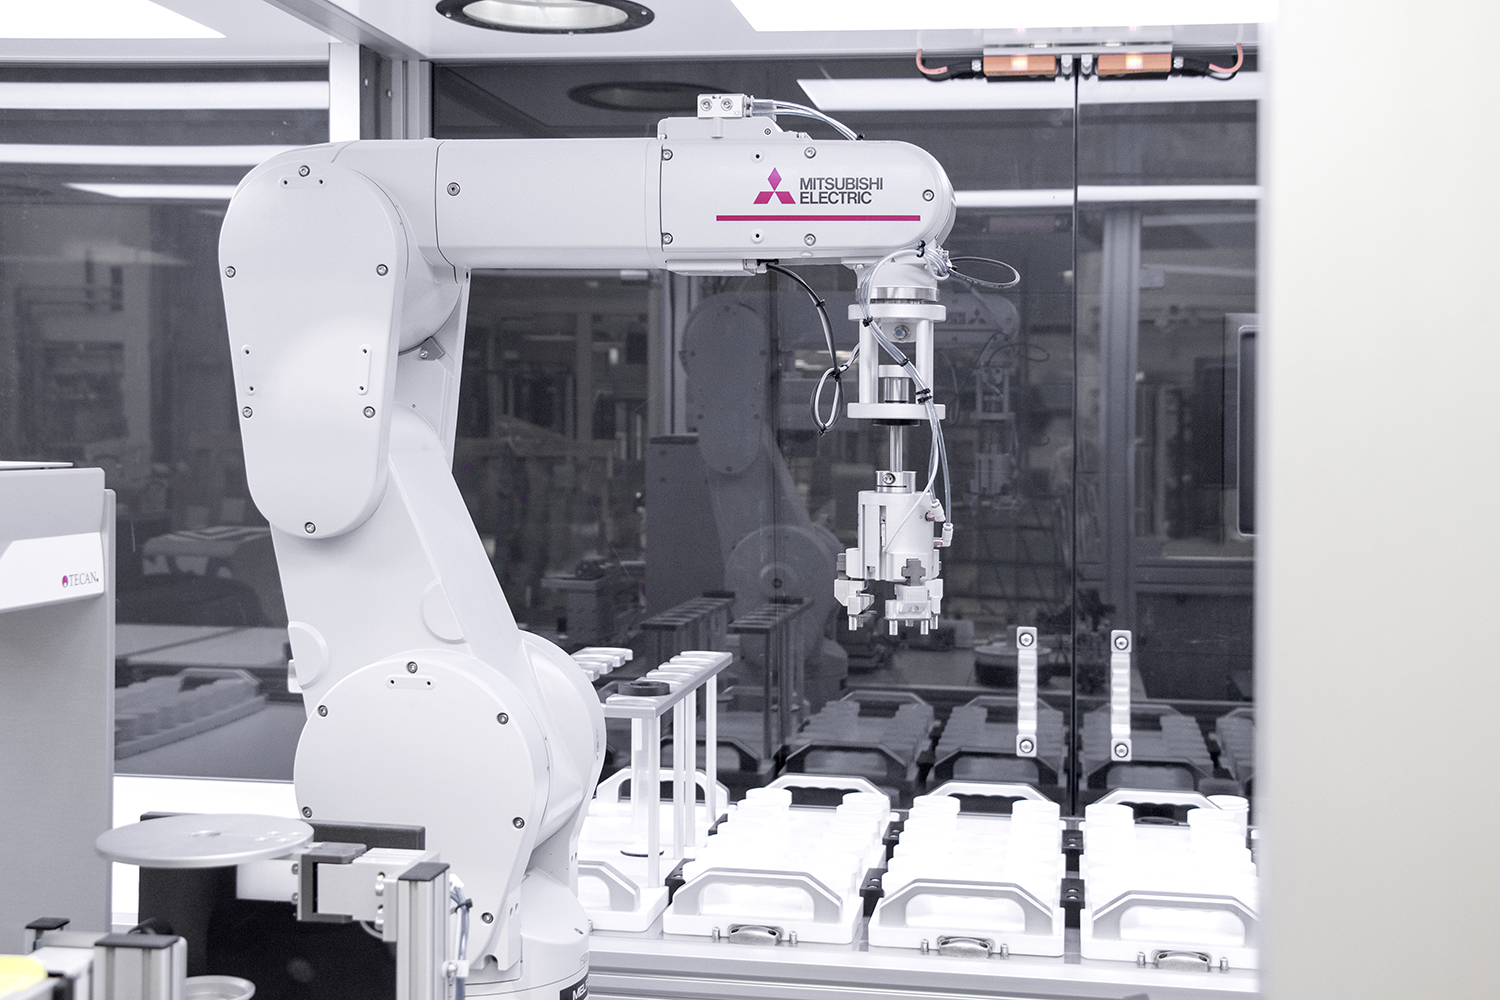 The innovative formulation system is built around two MELFA RV series six-axis robots that support processing, dispensing and handling activities for a wide range of materials. [Source: Labman Automation Ltd]